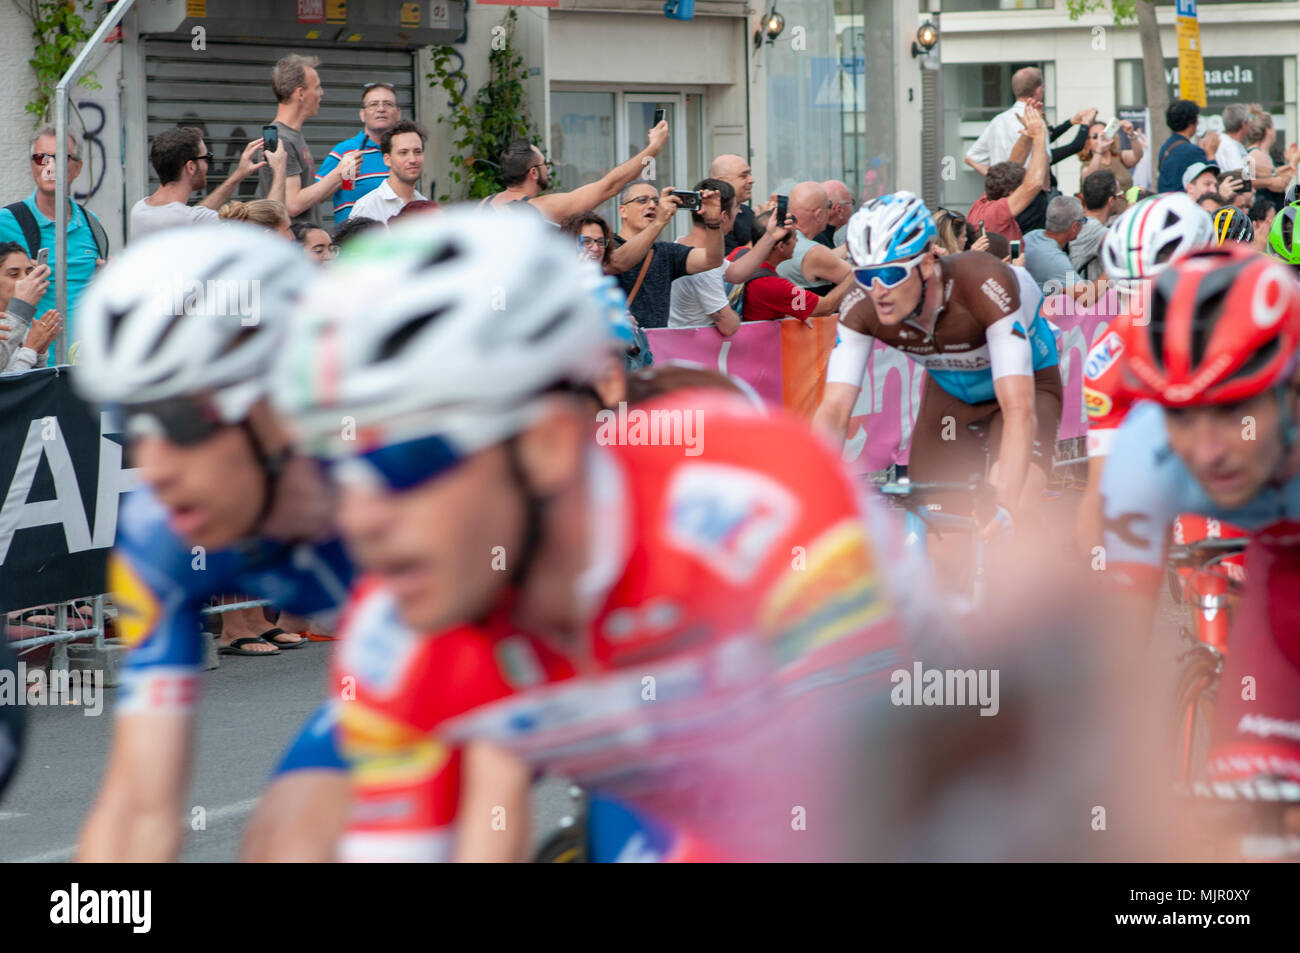 “Big Start” Israel Stage 2 of the Giro d’Italia, from Haifa to Tel Aviv (167Km), Photographed in Jaffa 500 Meters before the finish line, 5th May 2018 Stock Photo